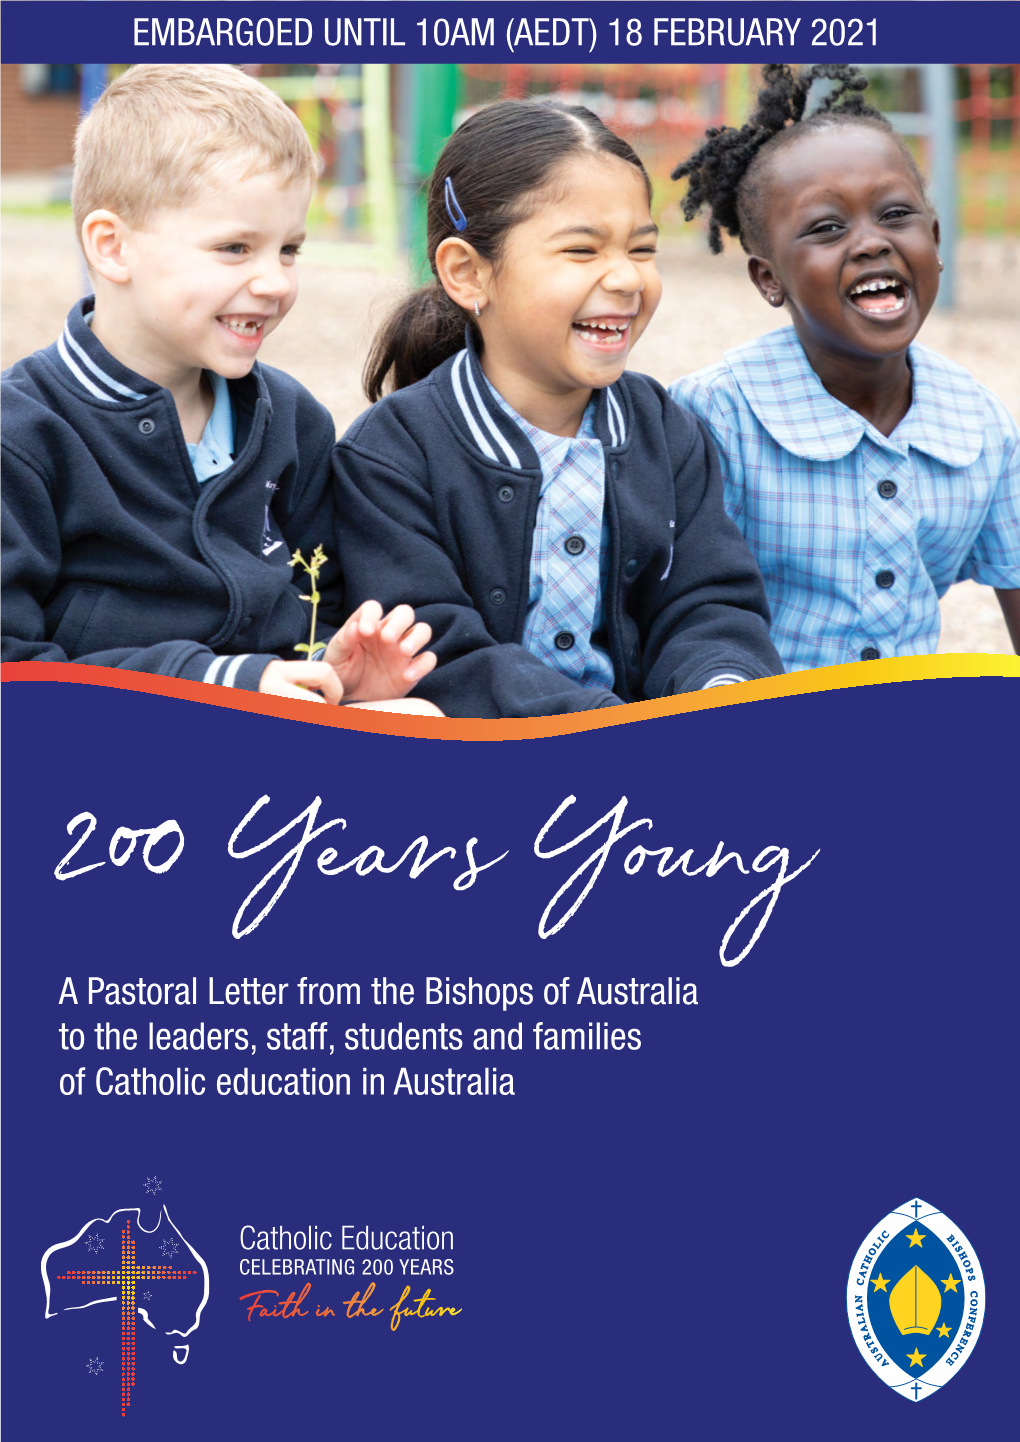 200 Years Young: a Pastoral Letter from the Bishops of Australia EMBARGOED UNTIL 10AM (AEDT) 18 FEBRUARY 2021